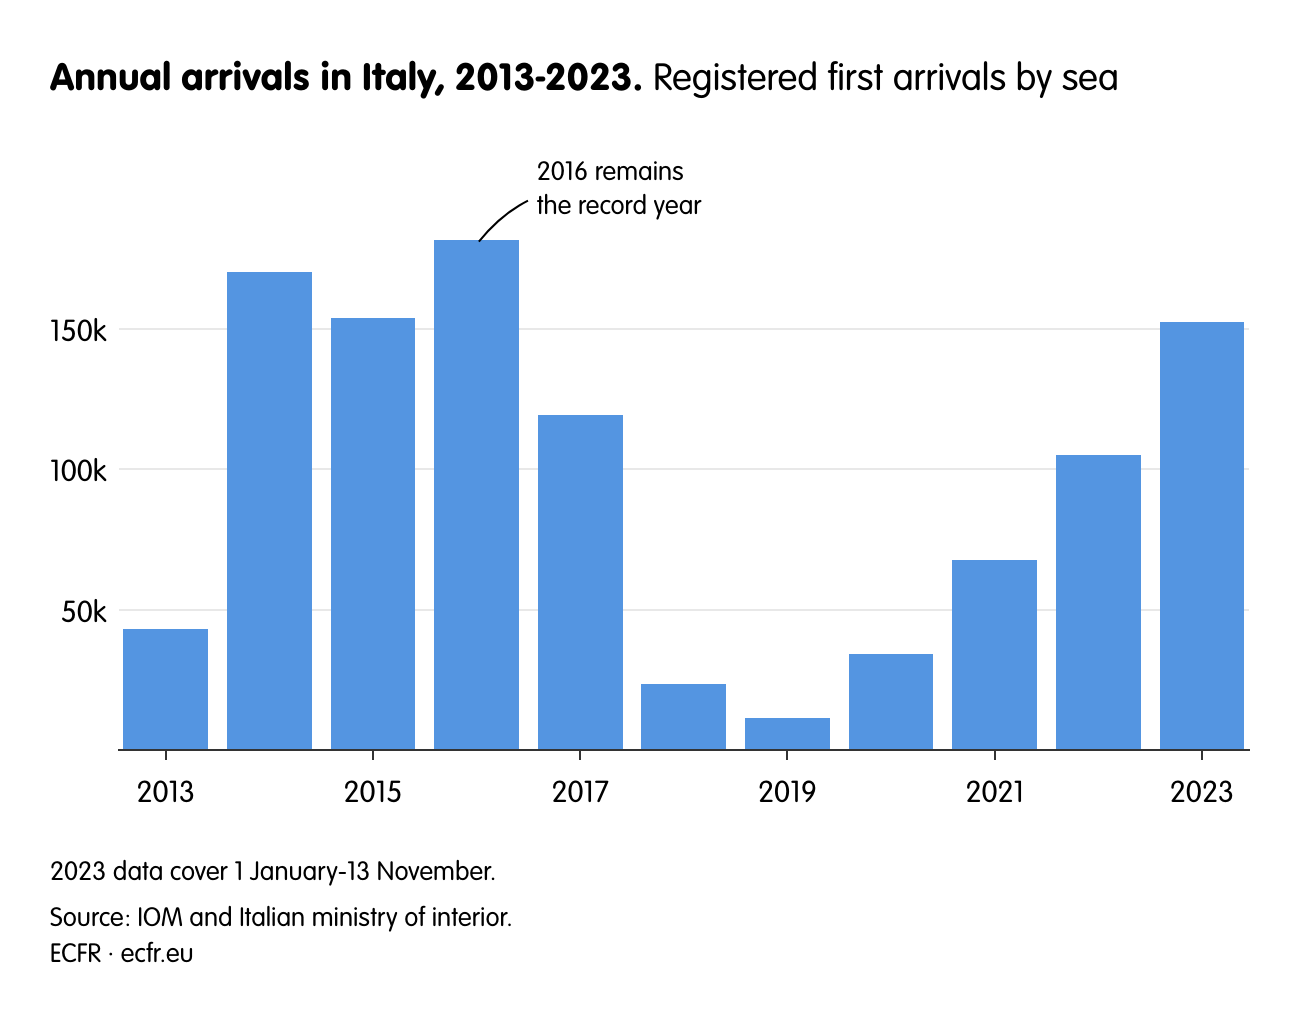 Annual arrivals in Italy, 2013-2023.